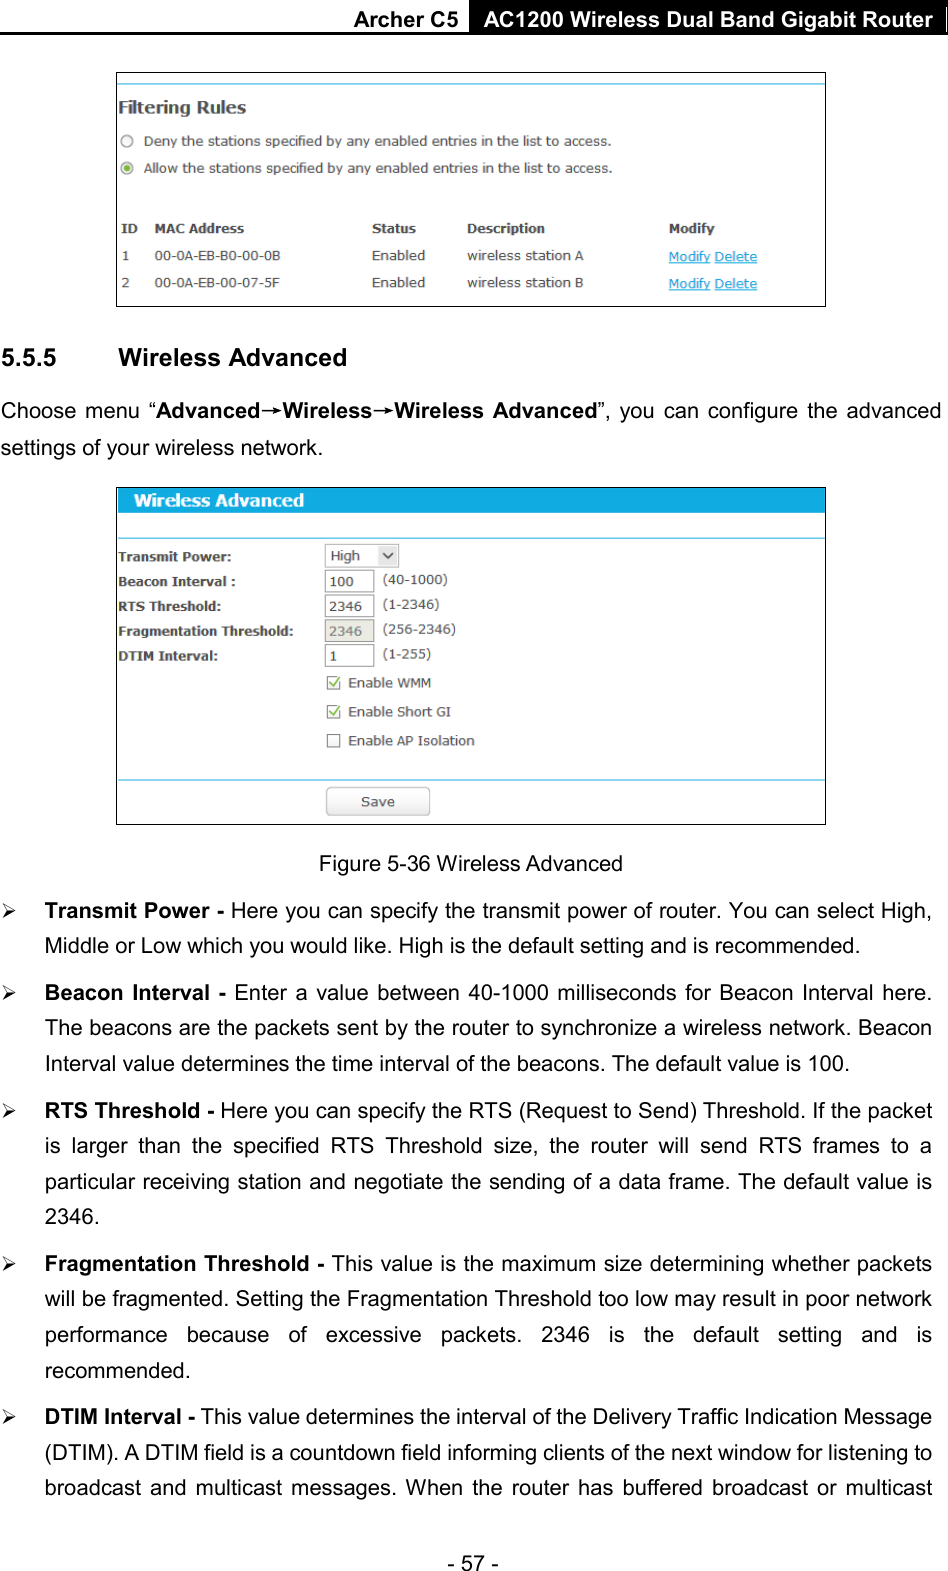 Archer C5  AC1200 Wireless Dual Band Gigabit Router   5.5.5 Wireless Advanced Choose menu “Advanced→Wireless→Wireless Advanced”, you can configure the advanced settings of your wireless network.  Figure 5-36 Wireless Advanced  Transmit Power - Here you can specify the transmit power of router. You can select High, Middle or Low which you would like. High is the default setting and is recommended.  Beacon Interval - Enter a value between 40-1000 milliseconds for Beacon Interval here. The beacons are the packets sent by the router to synchronize a wireless network. Beacon Interval value determines the time interval of the beacons. The default value is 100.    RTS Threshold - Here you can specify the RTS (Request to Send) Threshold. If the packet is larger than the specified RTS Threshold size, the router will send RTS frames to a particular receiving station and negotiate the sending of a data frame. The default value is 2346.    Fragmentation Threshold - This value is the maximum size determining whether packets will be fragmented. Setting the Fragmentation Threshold too low may result in poor network performance because of excessive packets. 2346 is the default setting and is recommended.    DTIM Interval - This value determines the interval of the Delivery Traffic Indication Message (DTIM). A DTIM field is a countdown field informing clients of the next window for listening to broadcast and multicast messages. When the router has buffered broadcast or multicast - 57 - 